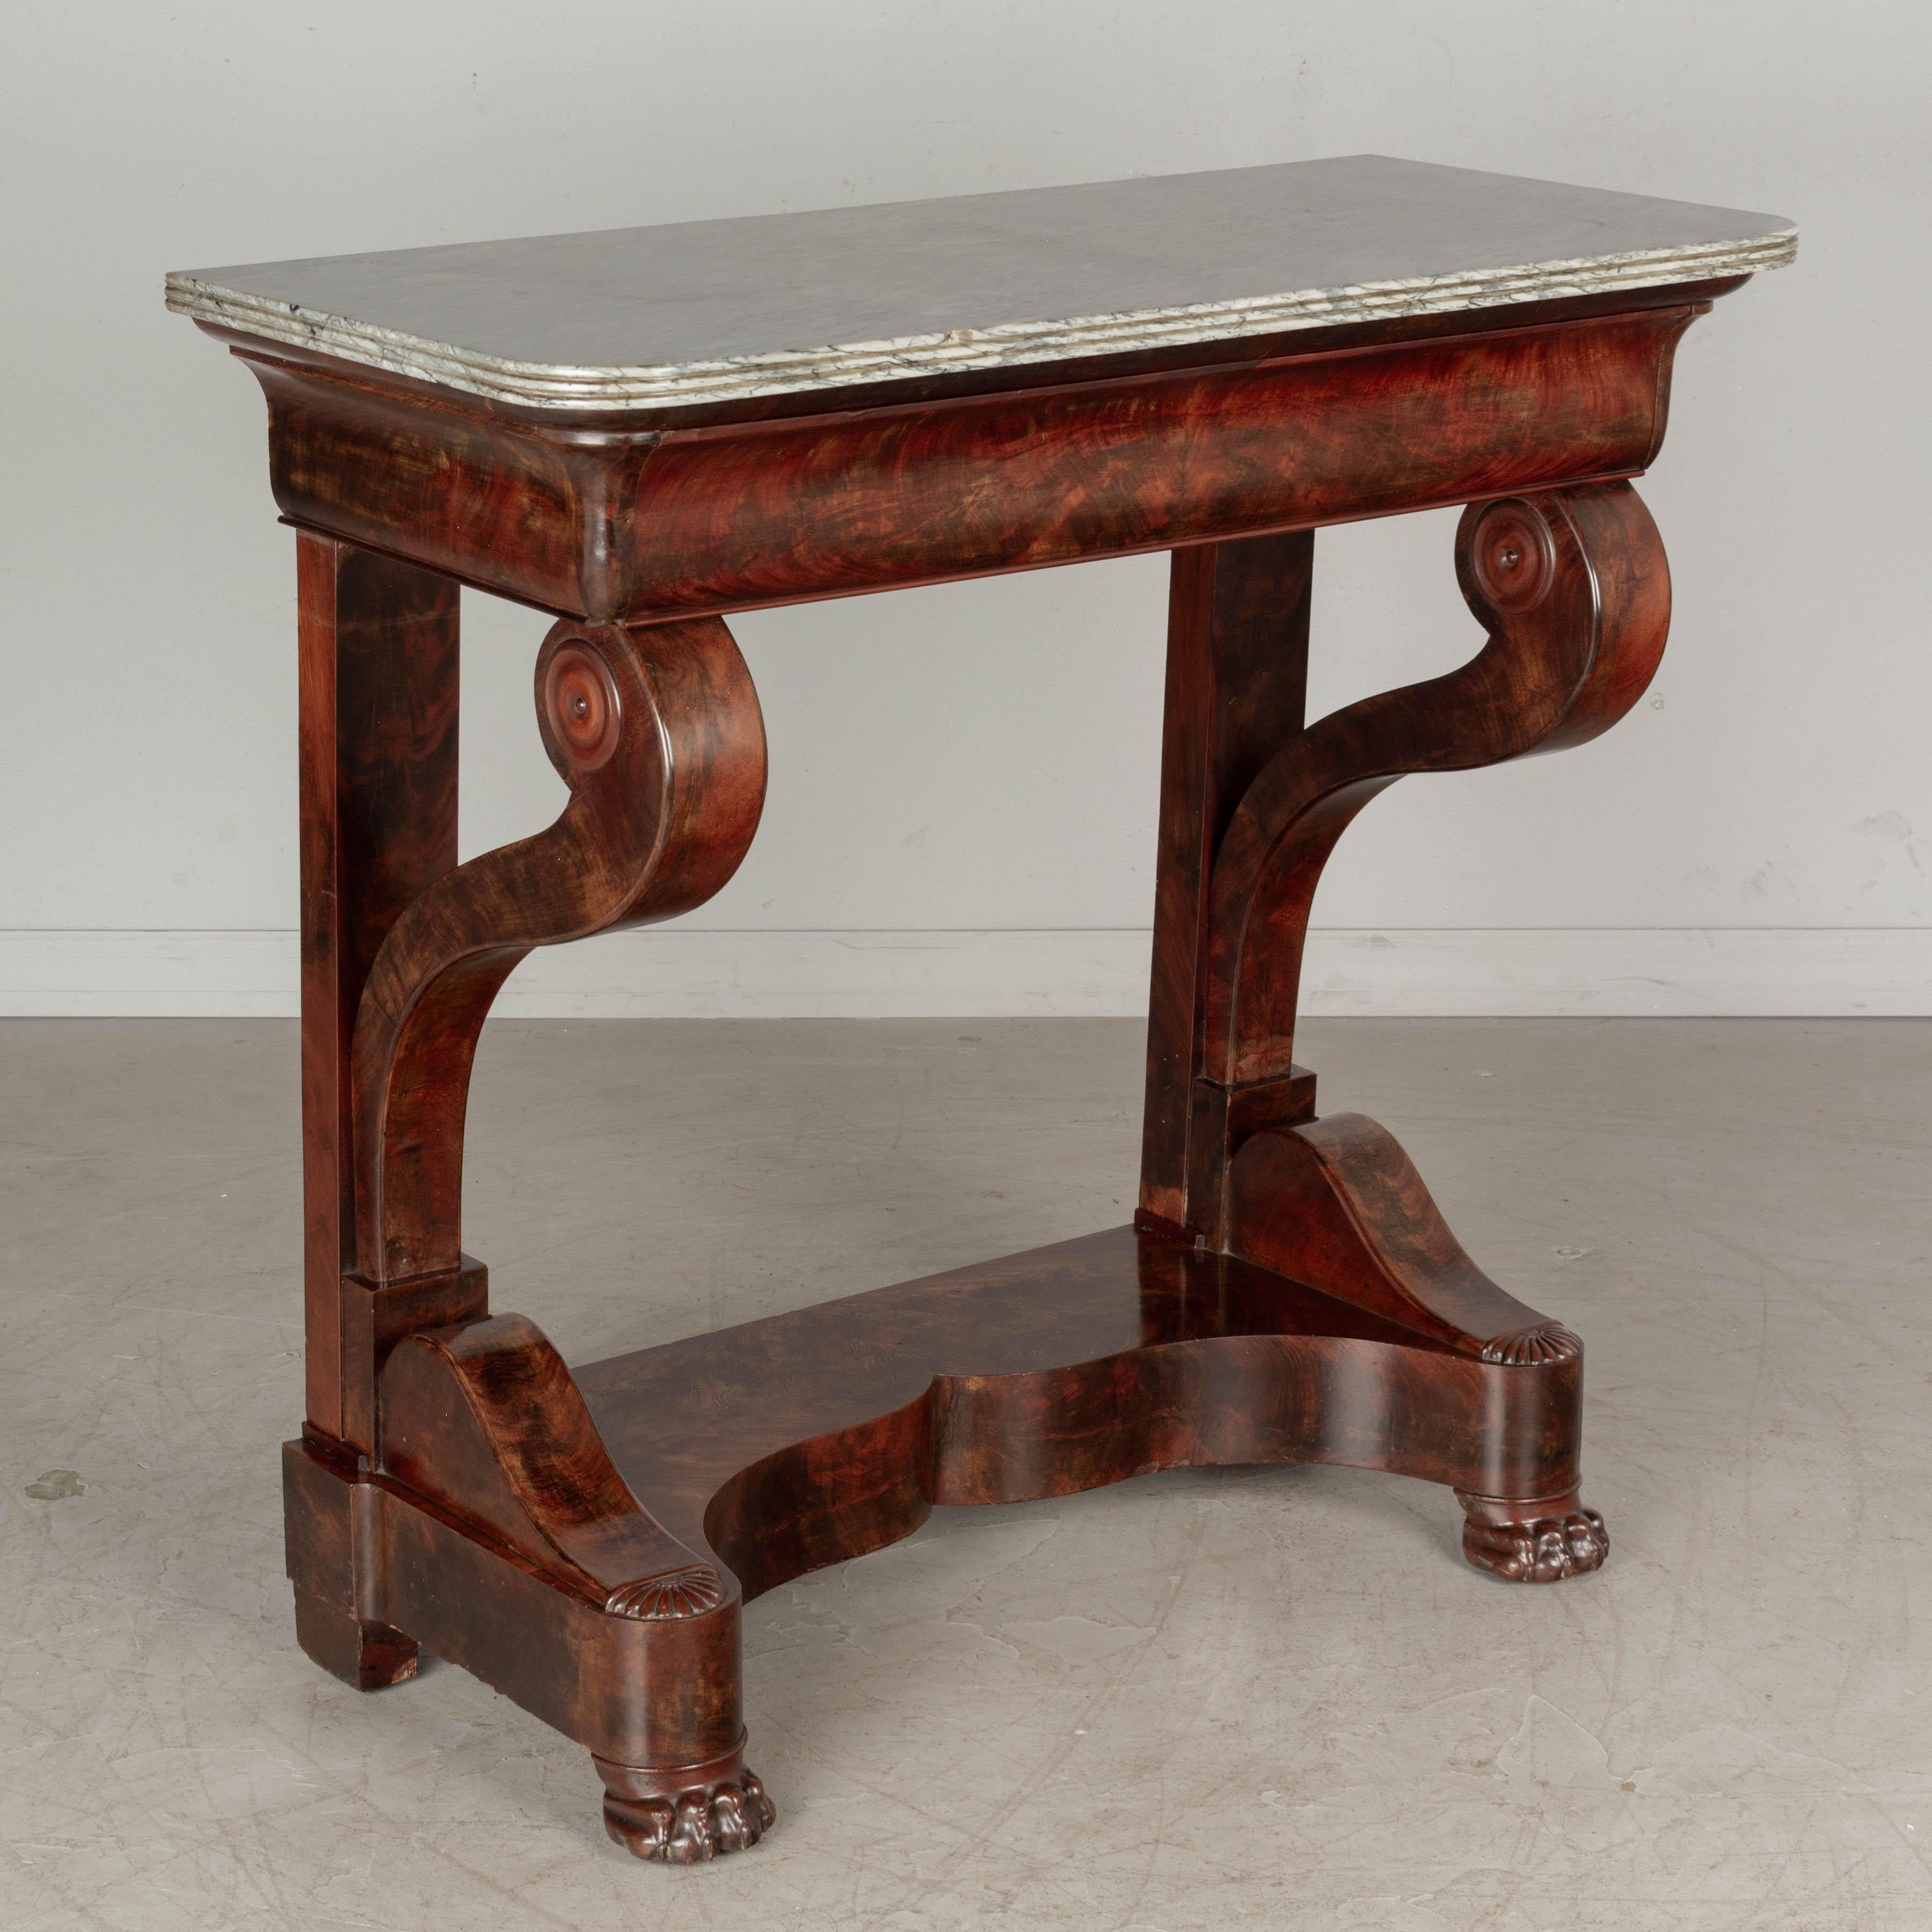 A 19th century French Louis Philippe style console made of book matched veneer of flame mahogany with dovetailed drawer. Sculptural scroll supports resting on a curved plinth base with lion's paw feet. Original gray veined marble top with rounded